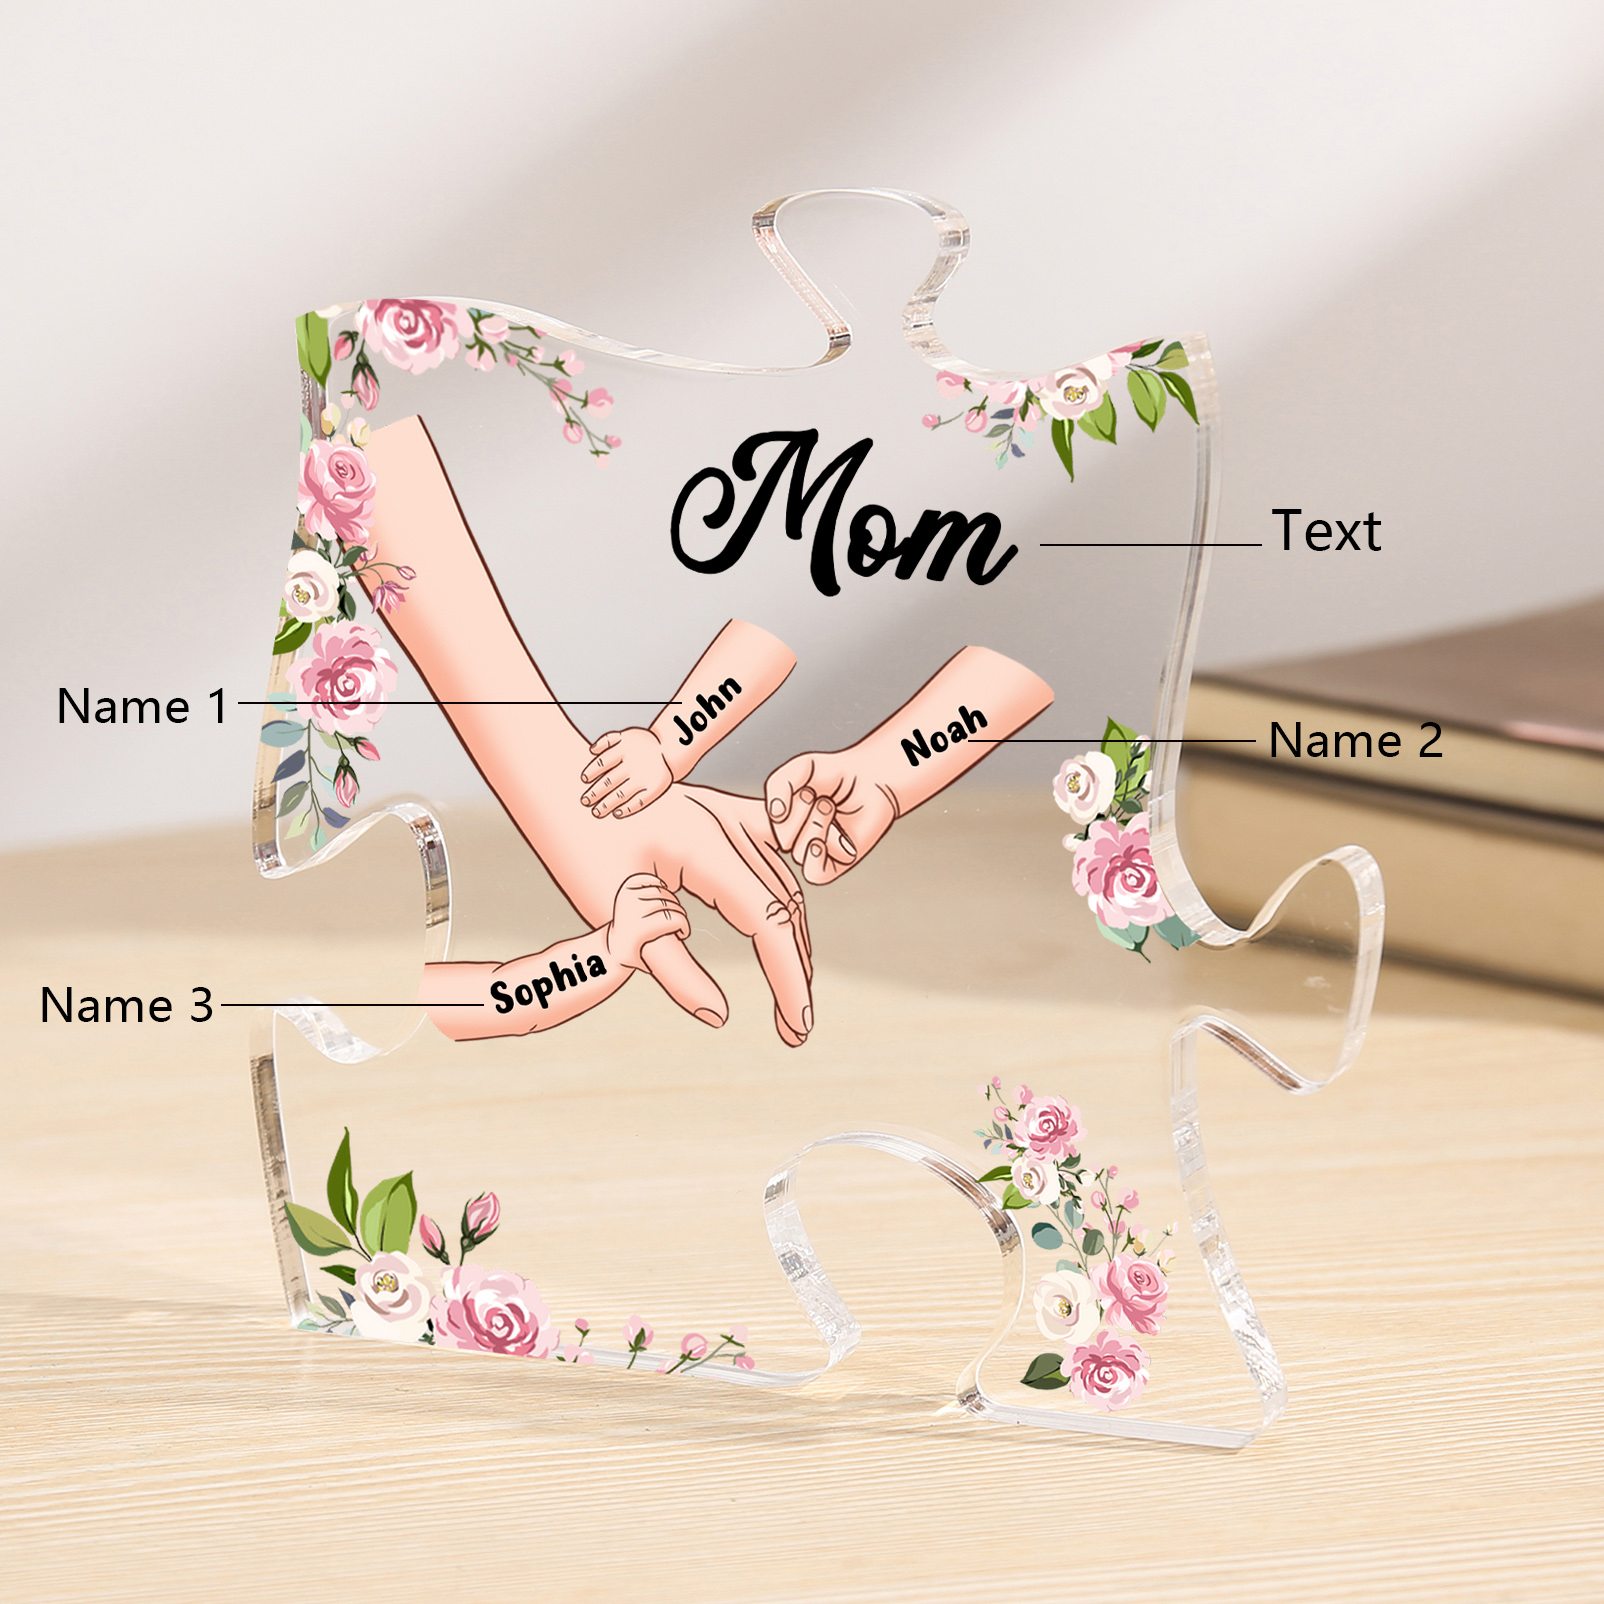 3 Name - Personalized Acrylic Heart Keepsake Customized Name Holding Hands Acrylic Plaque Ornament Mother's Day Gift for Mom